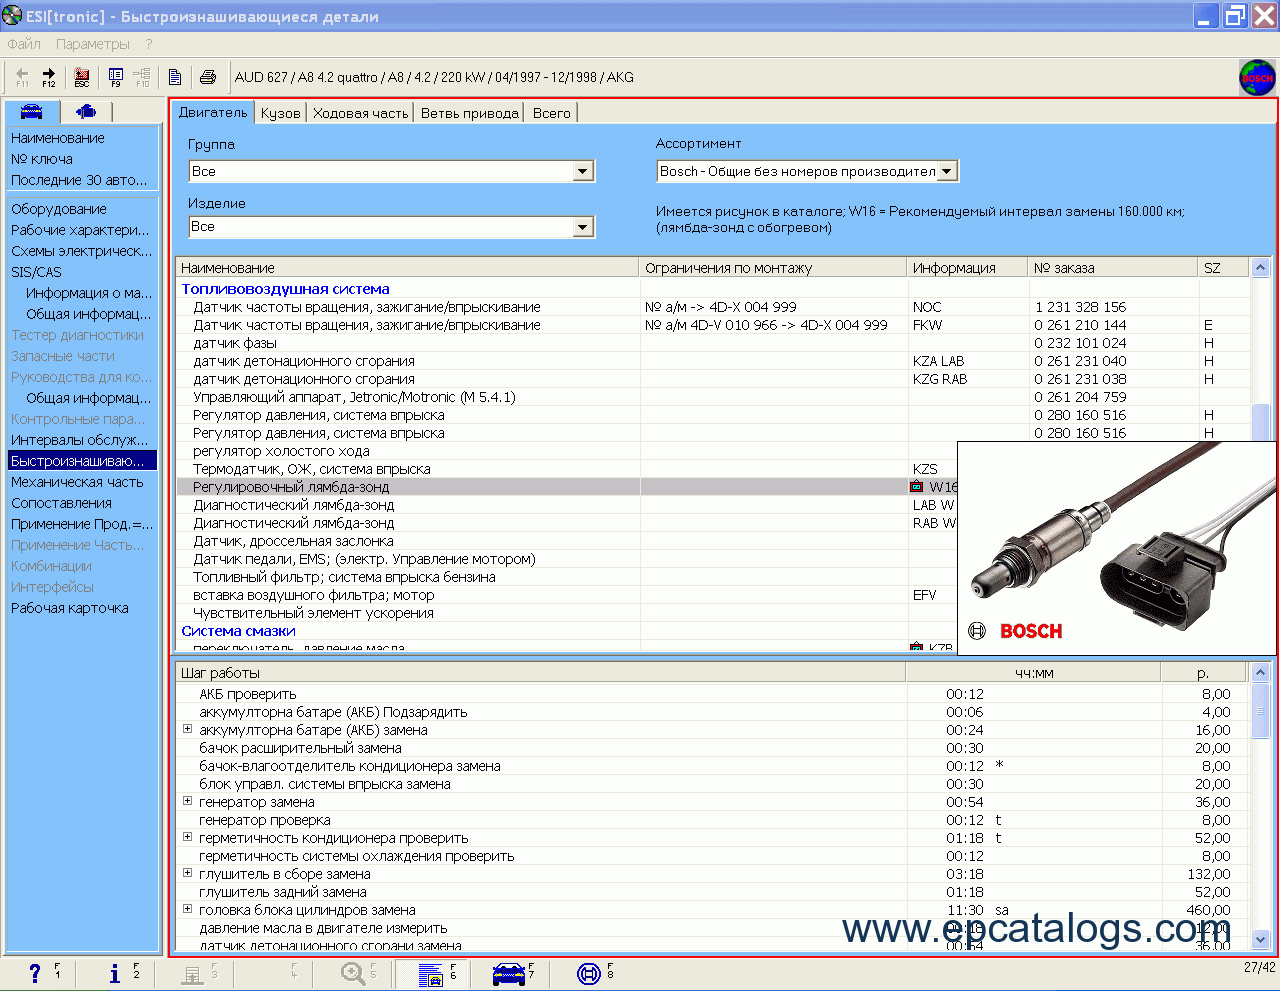 Usage: Bosch Esi Keygen 1q.2012.exe is a software tool used for generating activation codes for Bosch ESI[tronic] 1q.2012 software, allowing users to fully access and utilize the features of the program.
Associated software: Bosch Esi Keygen 1q.2012.exe is specifically designed to work in conjunction with Bosch ESI[tronic] 1q.2012, a comprehensive diagnostic software for automotive repairs and maintenance.